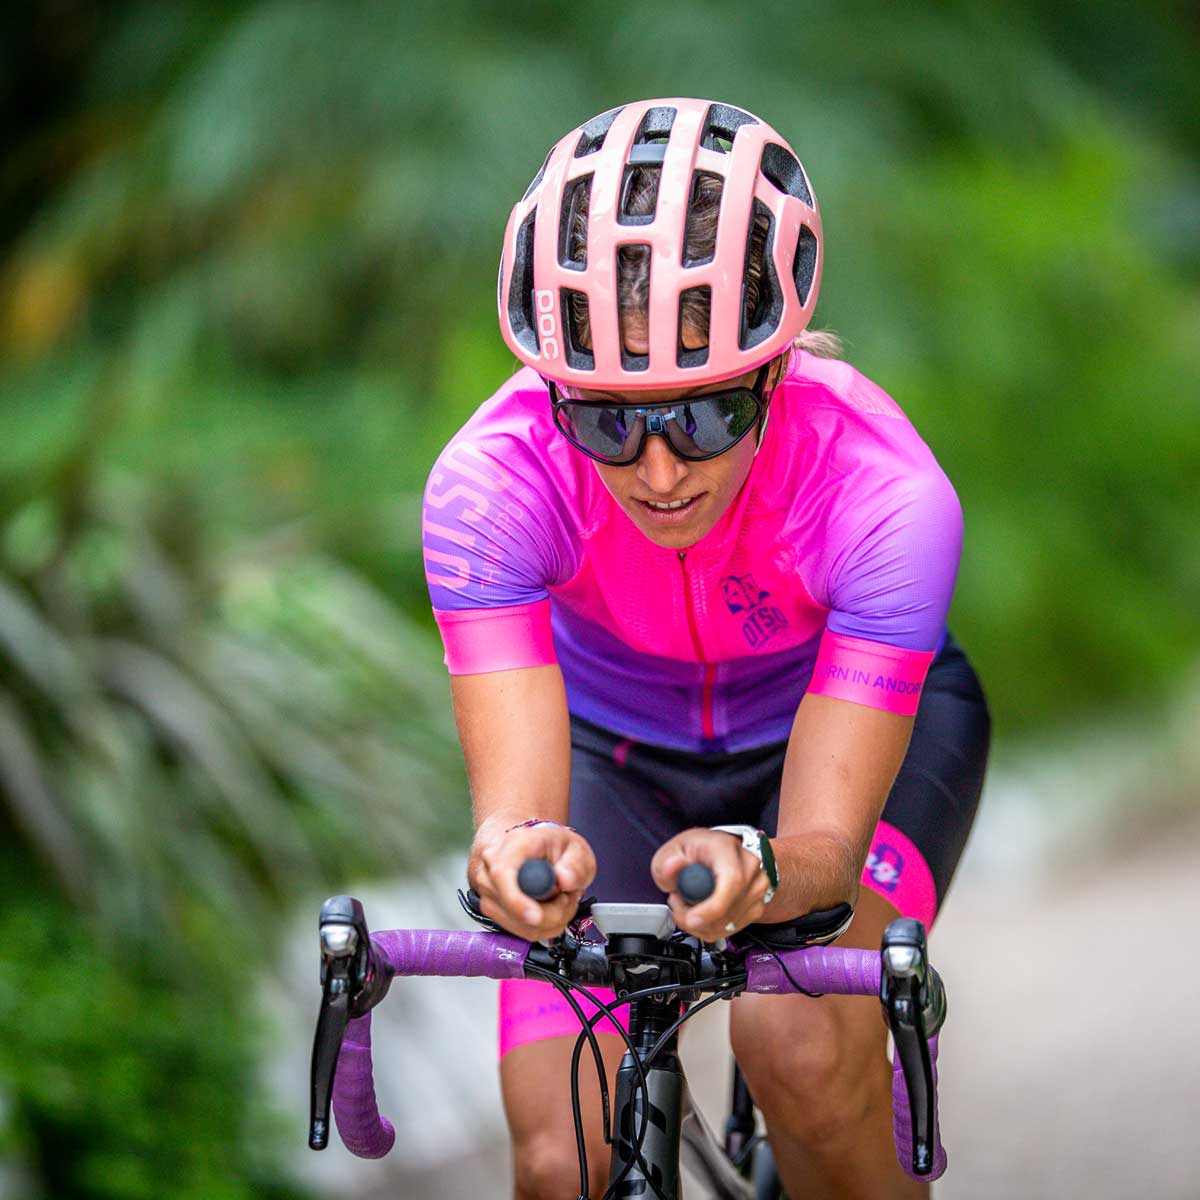 Maillot de ciclismo manga corta mujer - Fluo Pink (Outlet)